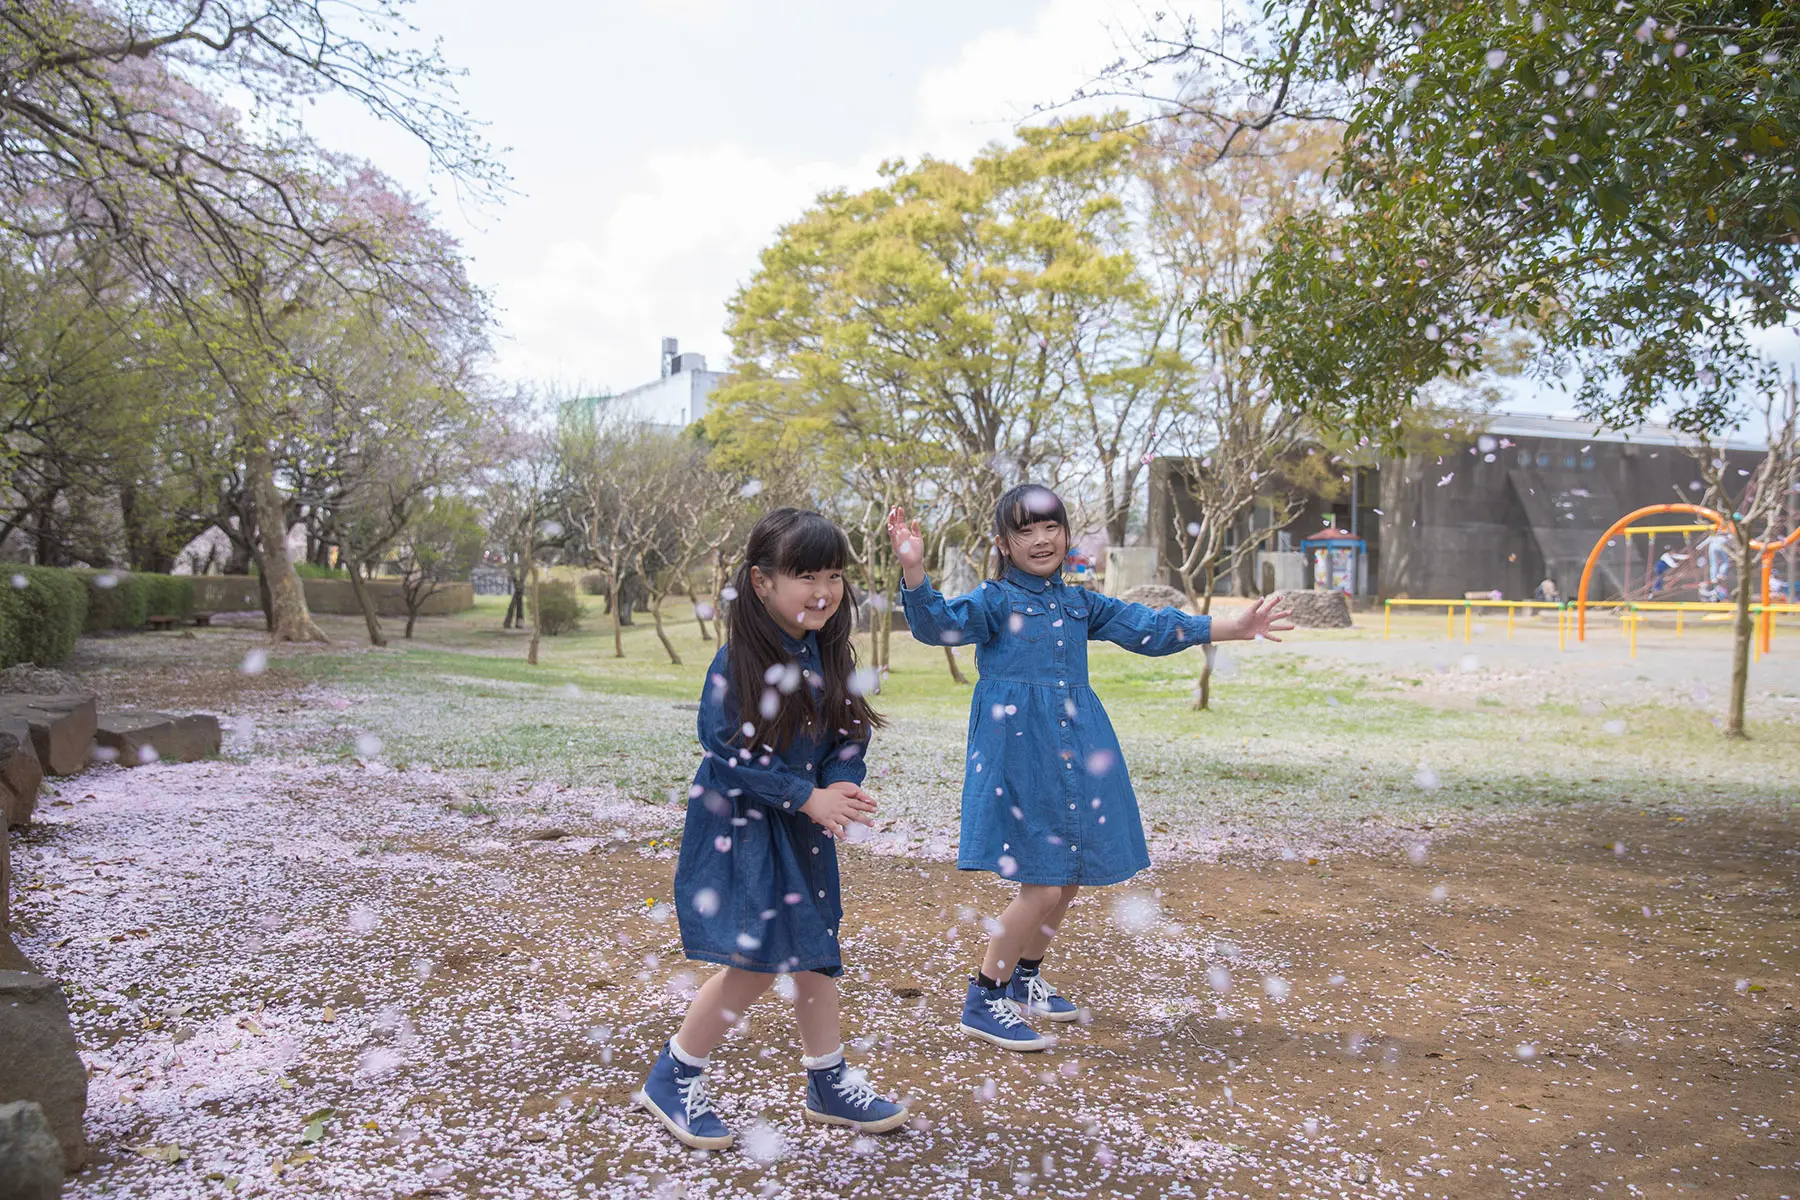 Little girls playing with cherry blossoms in a park